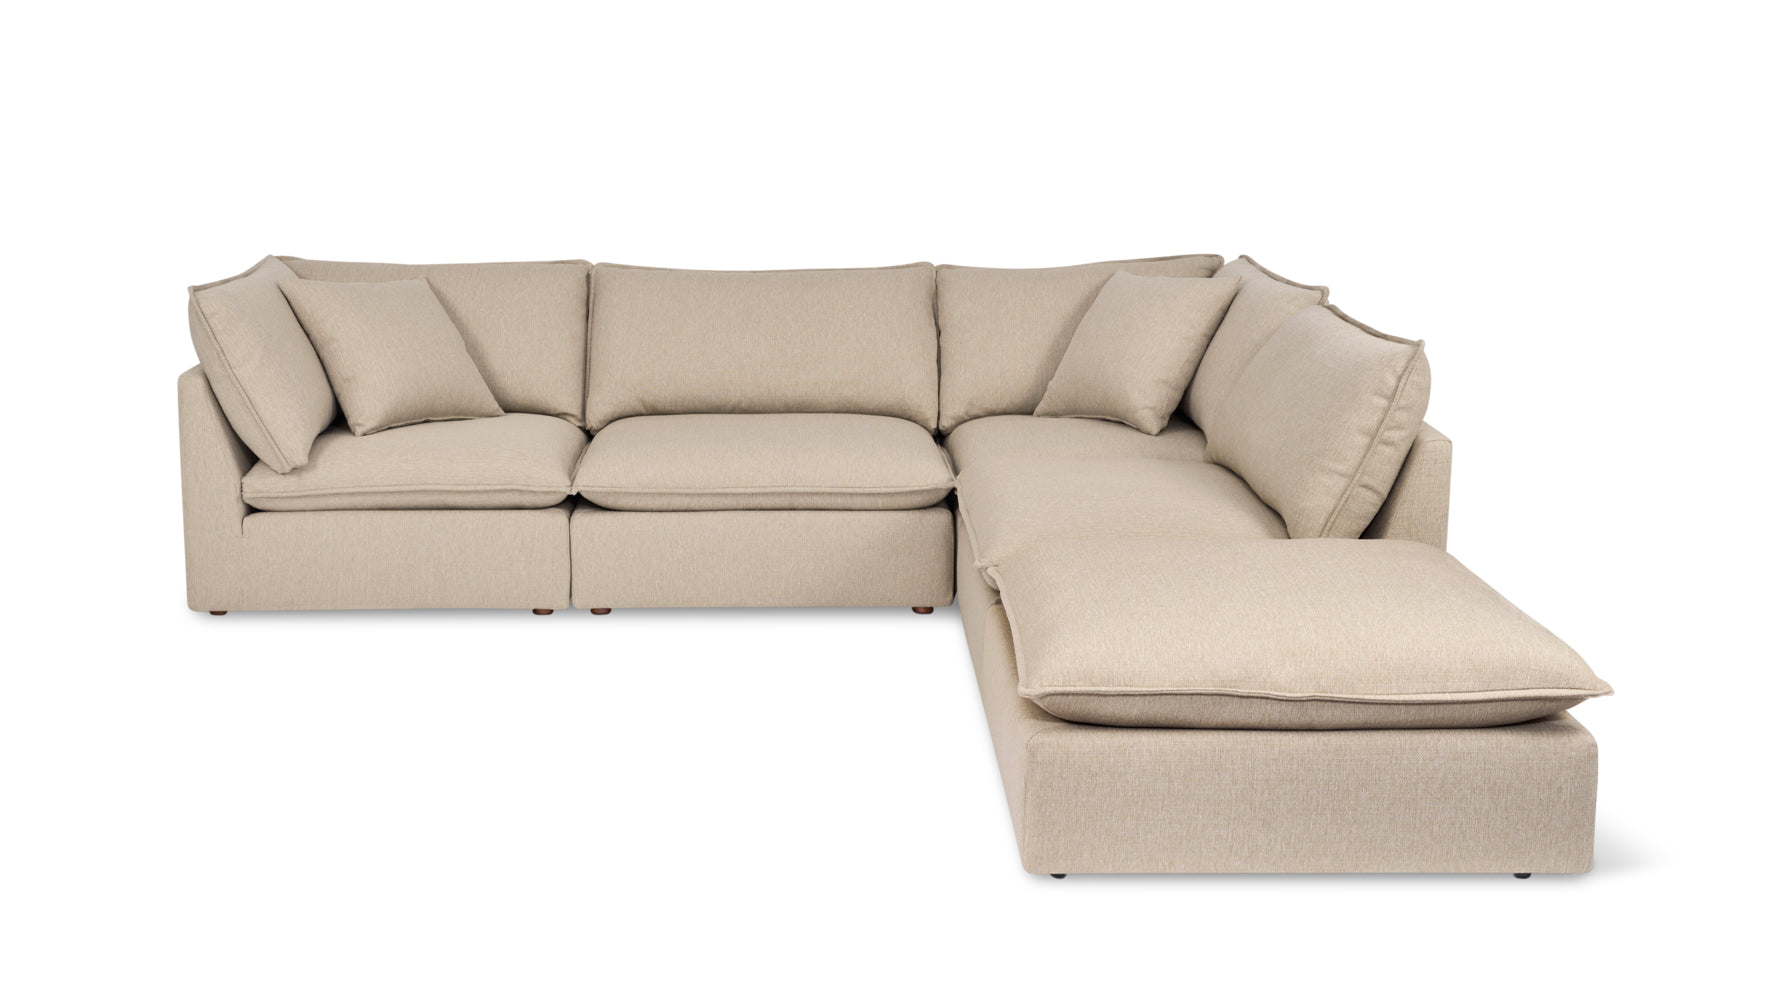 Chill Time 5-Piece Modular Sectional, Biscuit - Image 1